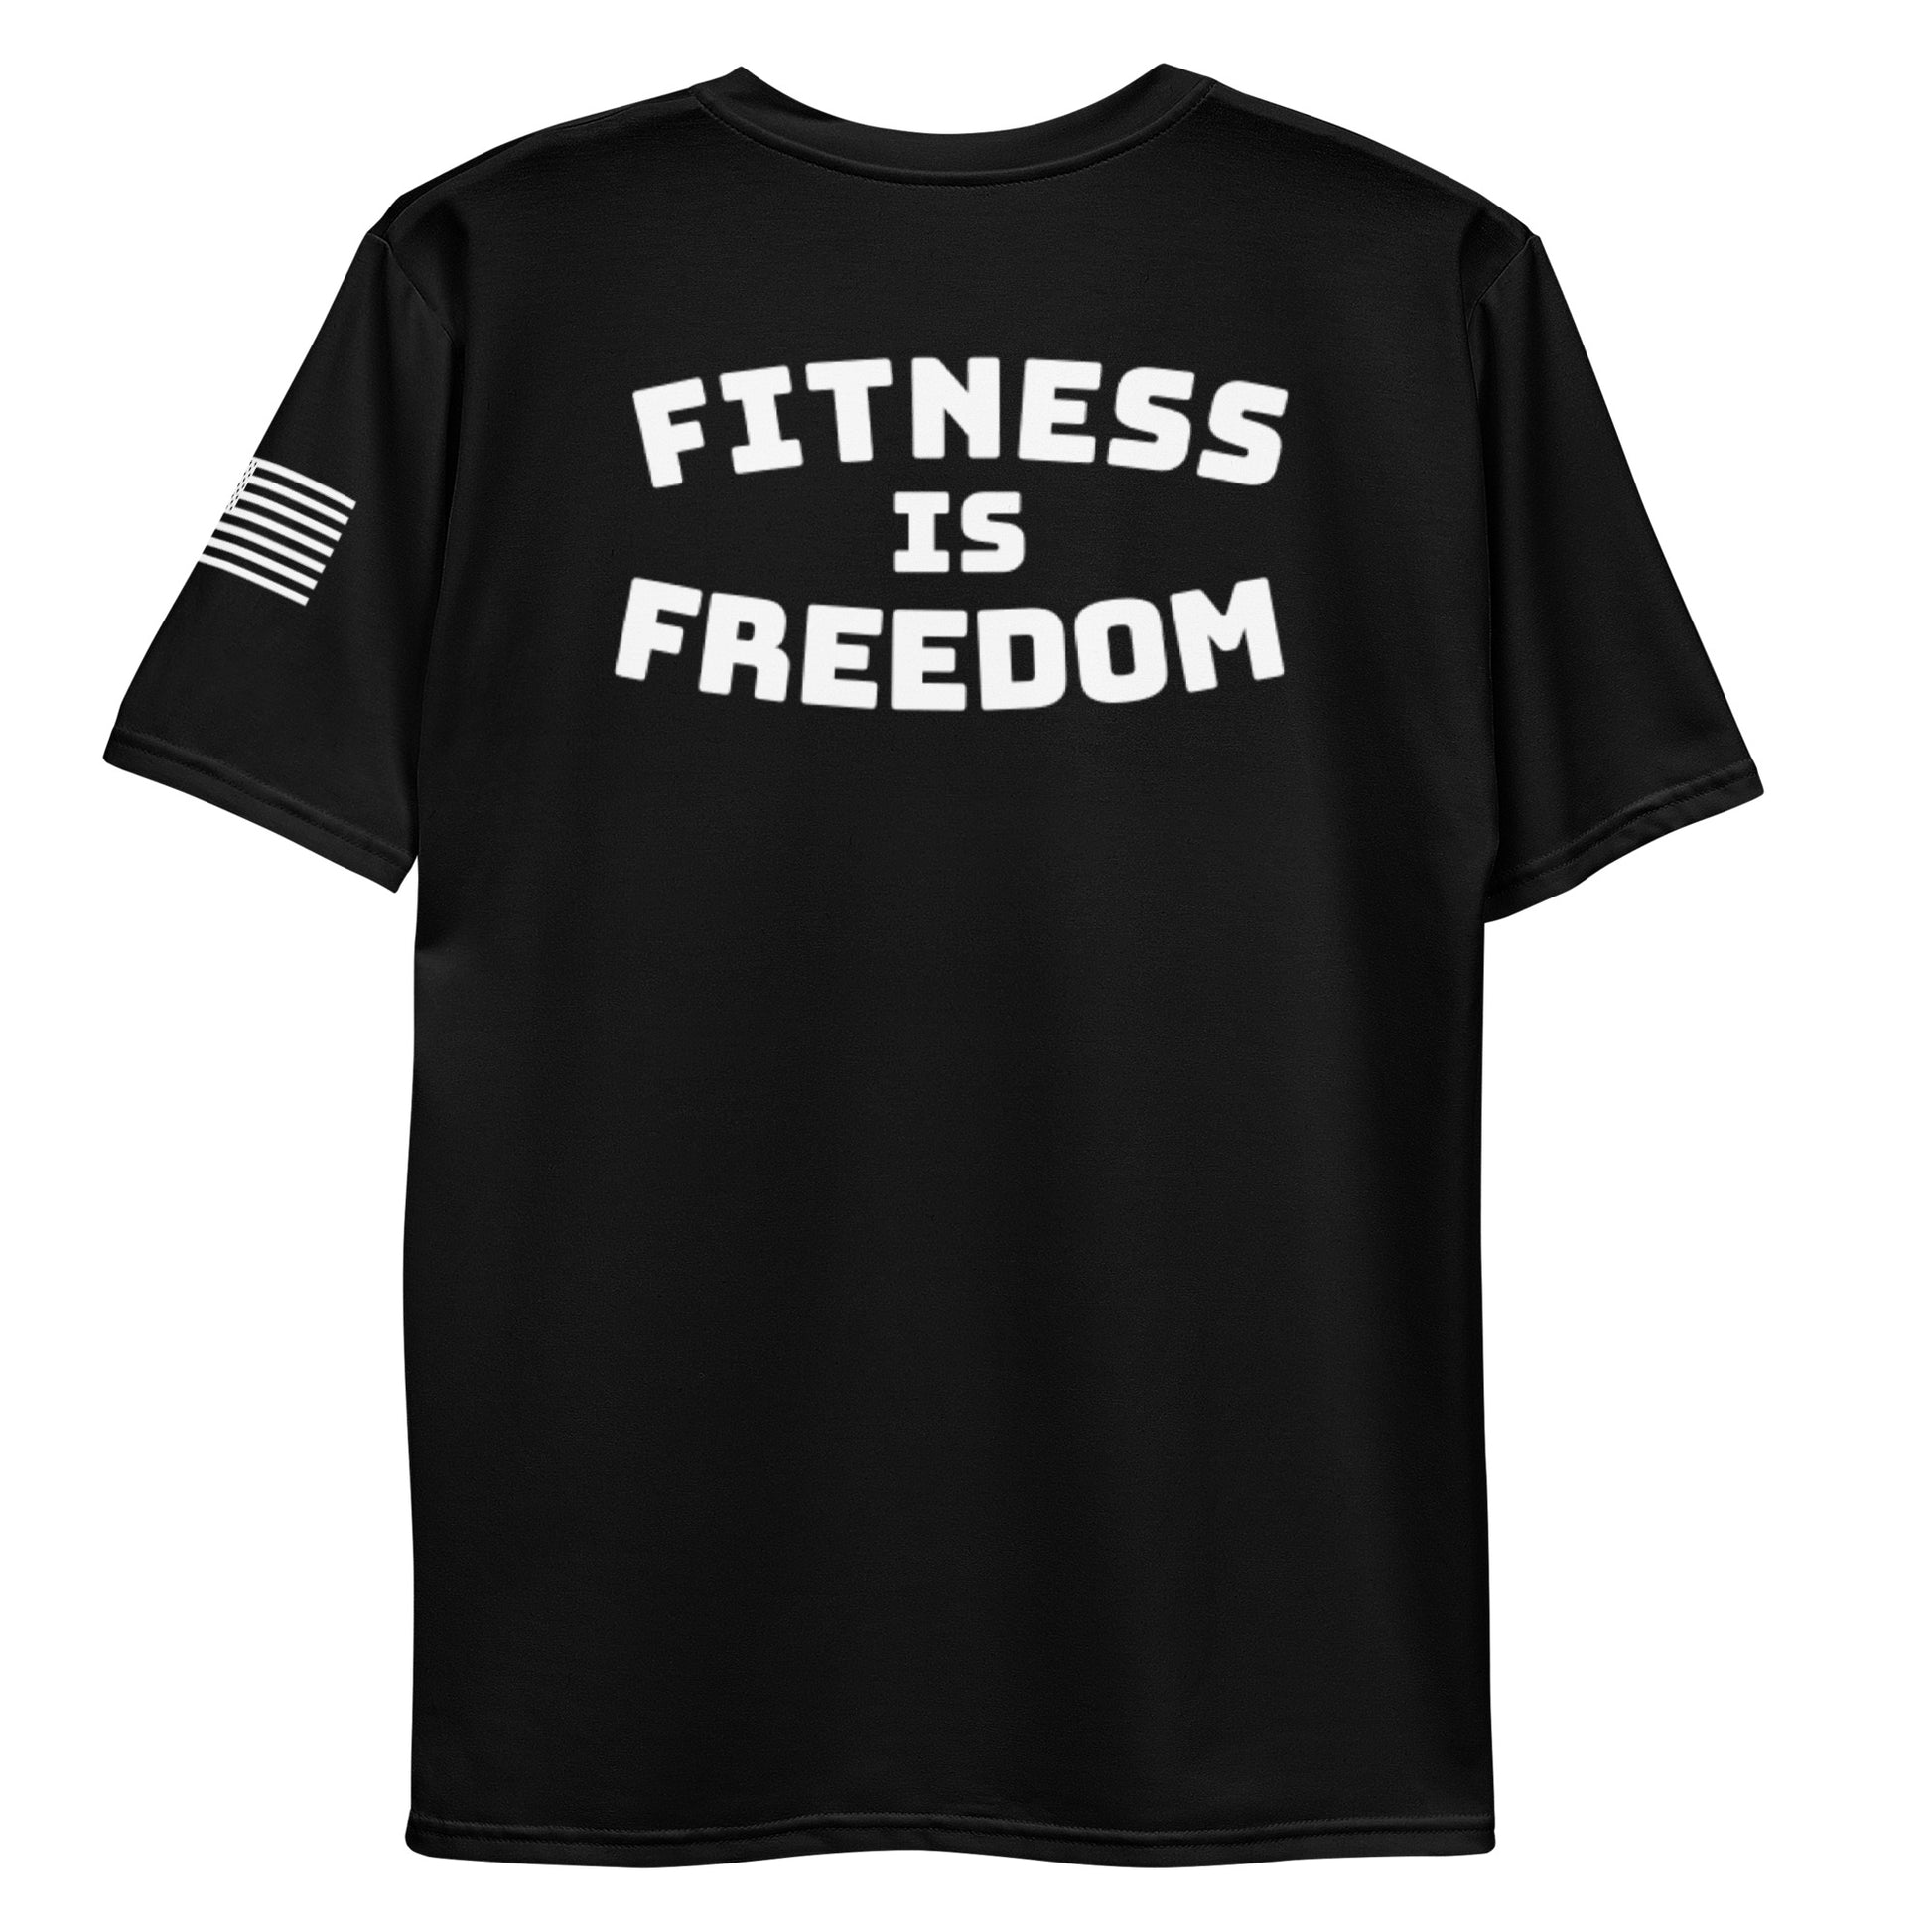 Men's Fitness is Freedom Shirt - Black and White - Back